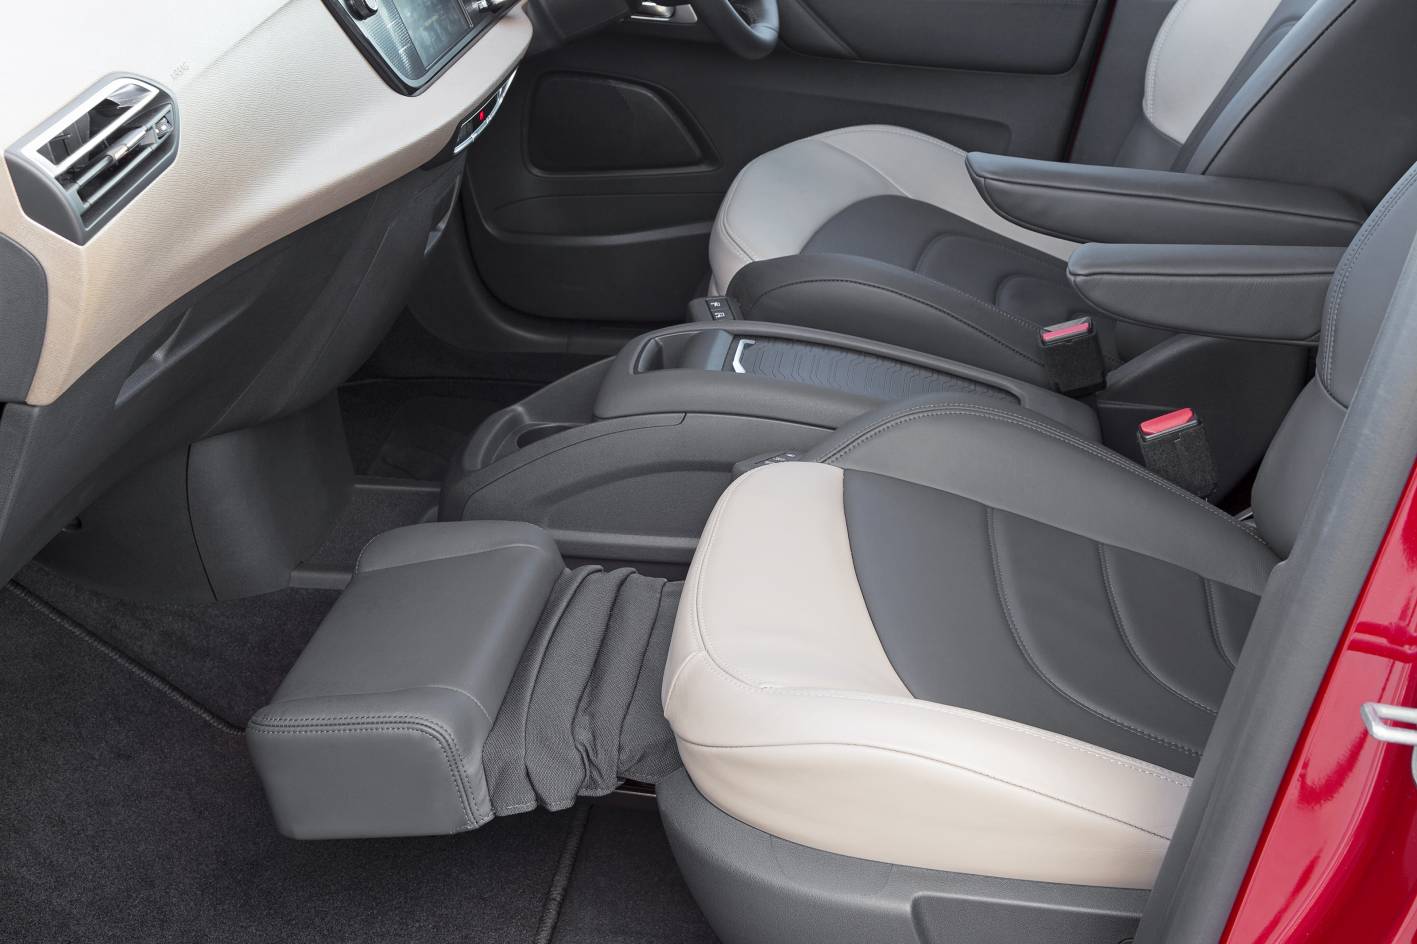 Citroen c4 picasso front seat removal